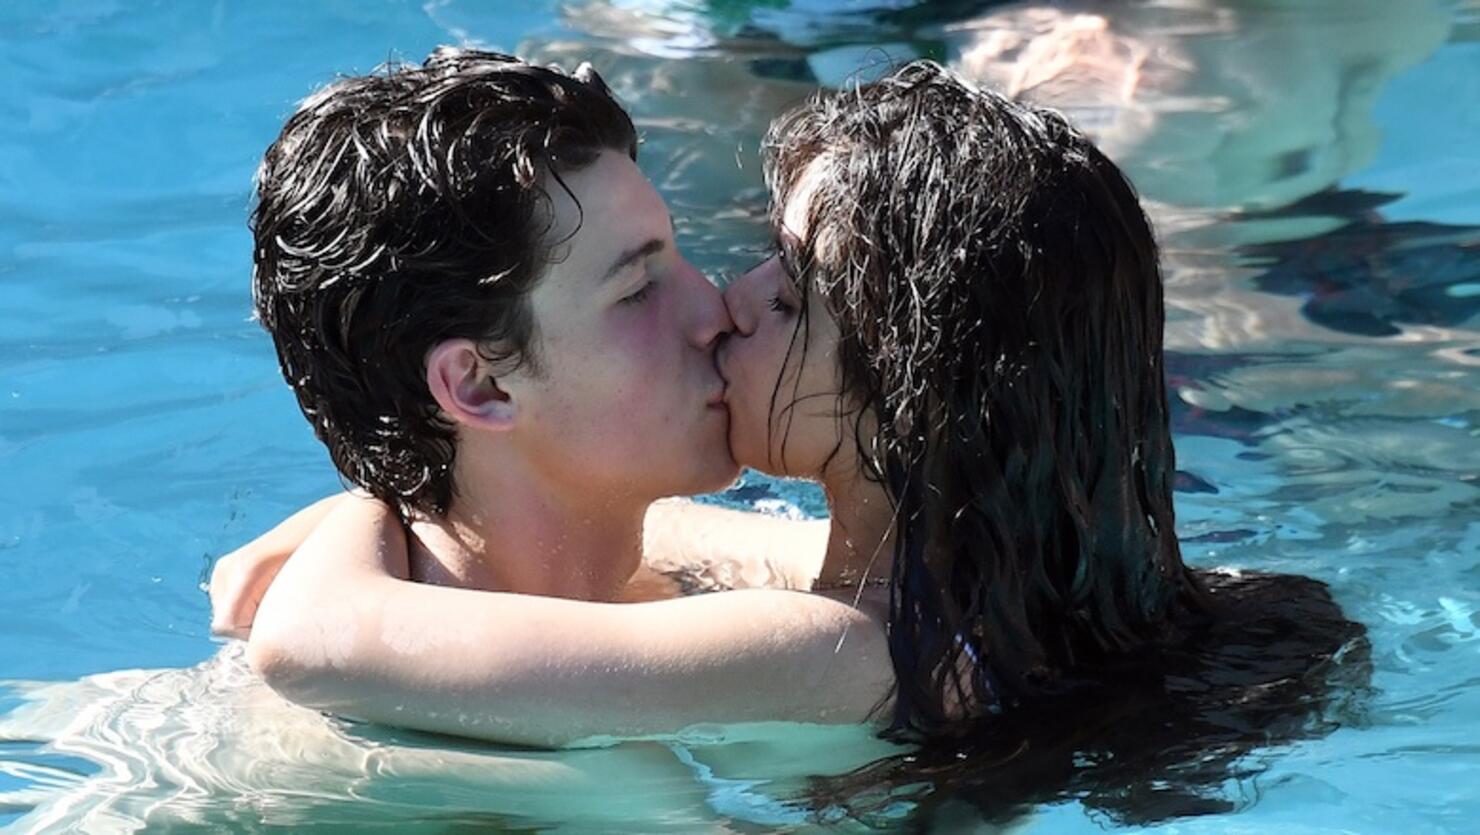 Camila Cabello and boyfriend Shawn Mendes can't keep their hand, or their lips, off each other as they make out in the pool in Miami